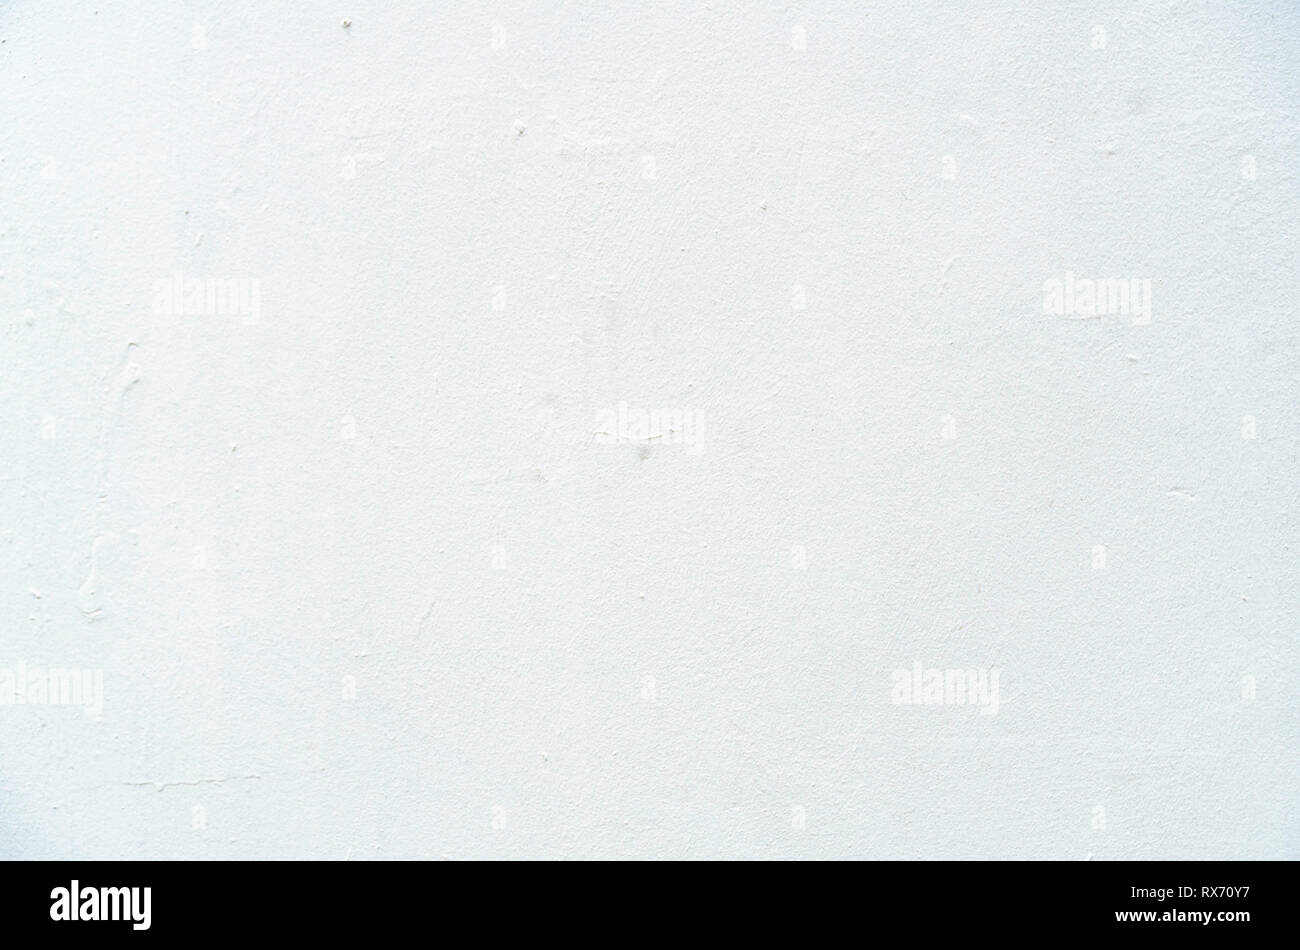 A close-up of a clean white wall. Stock Photo